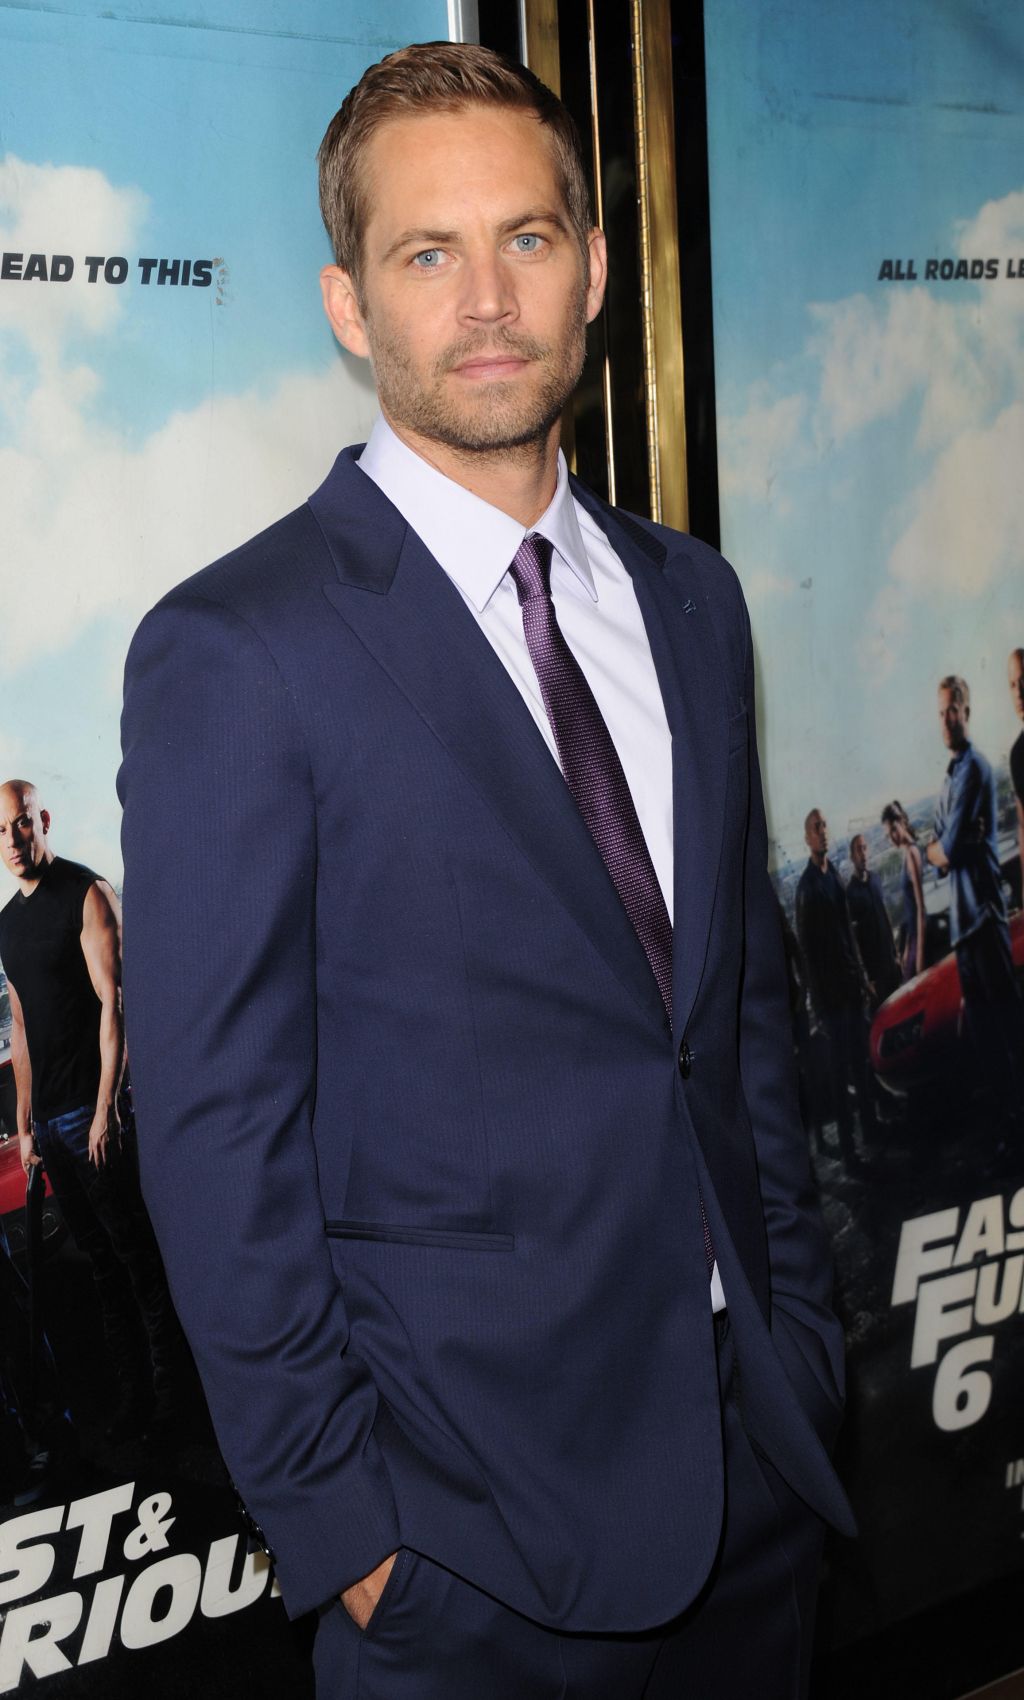 Paul Walker attends the 'Fast & Furious 6' World Premiere at The Empire, Leicester Square on May 7, 2013 in London, England.